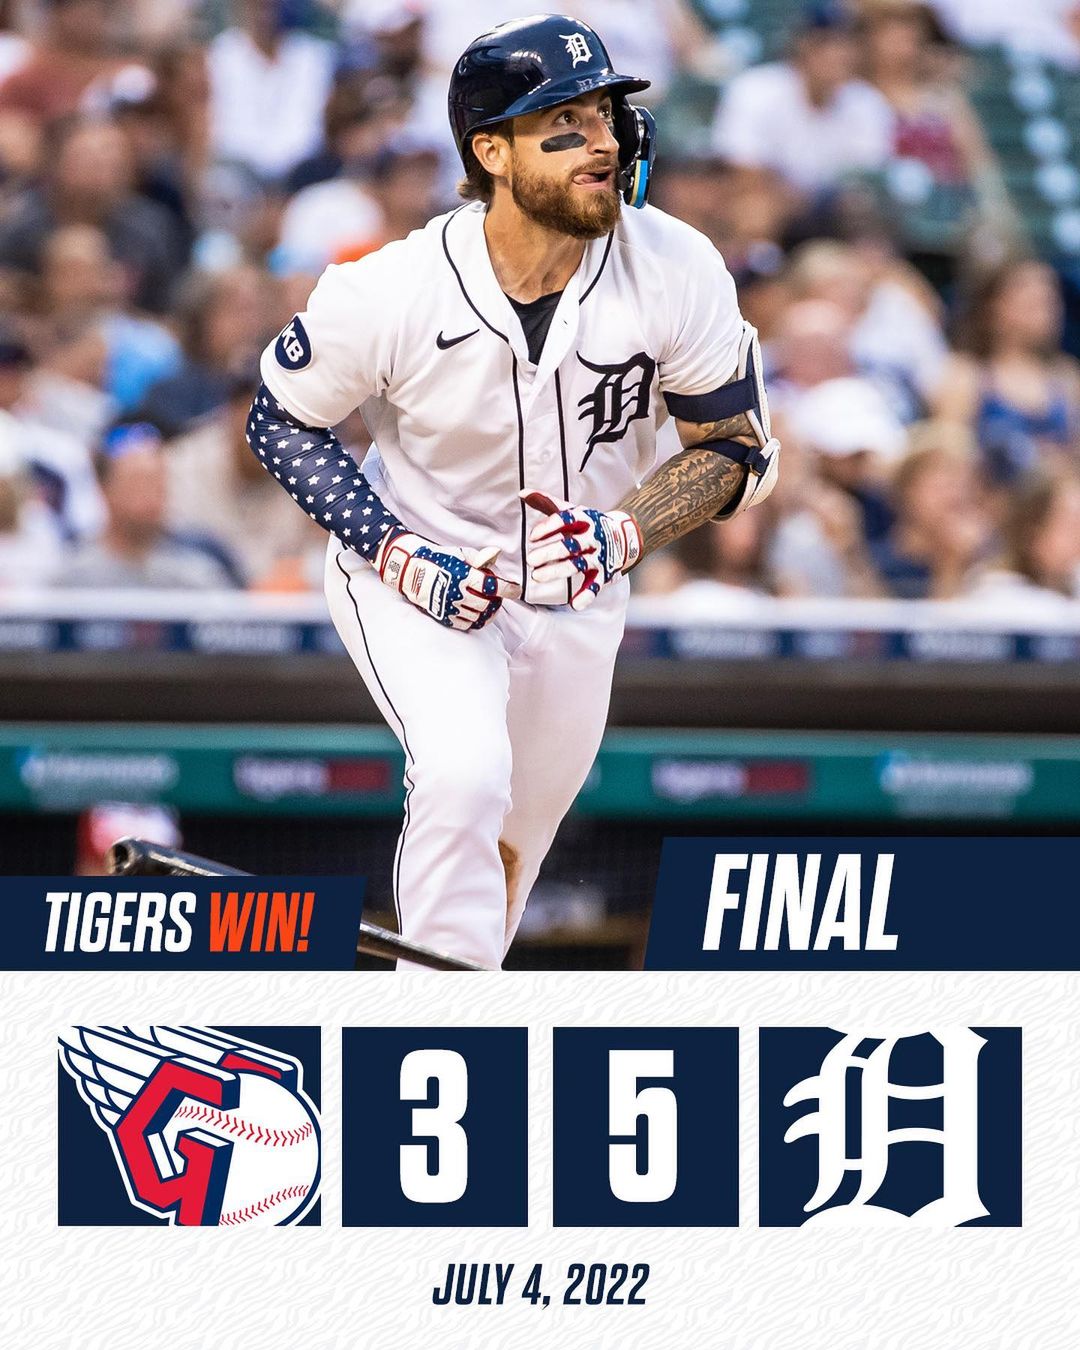 Fireworks on and off the field! #TigersWin...